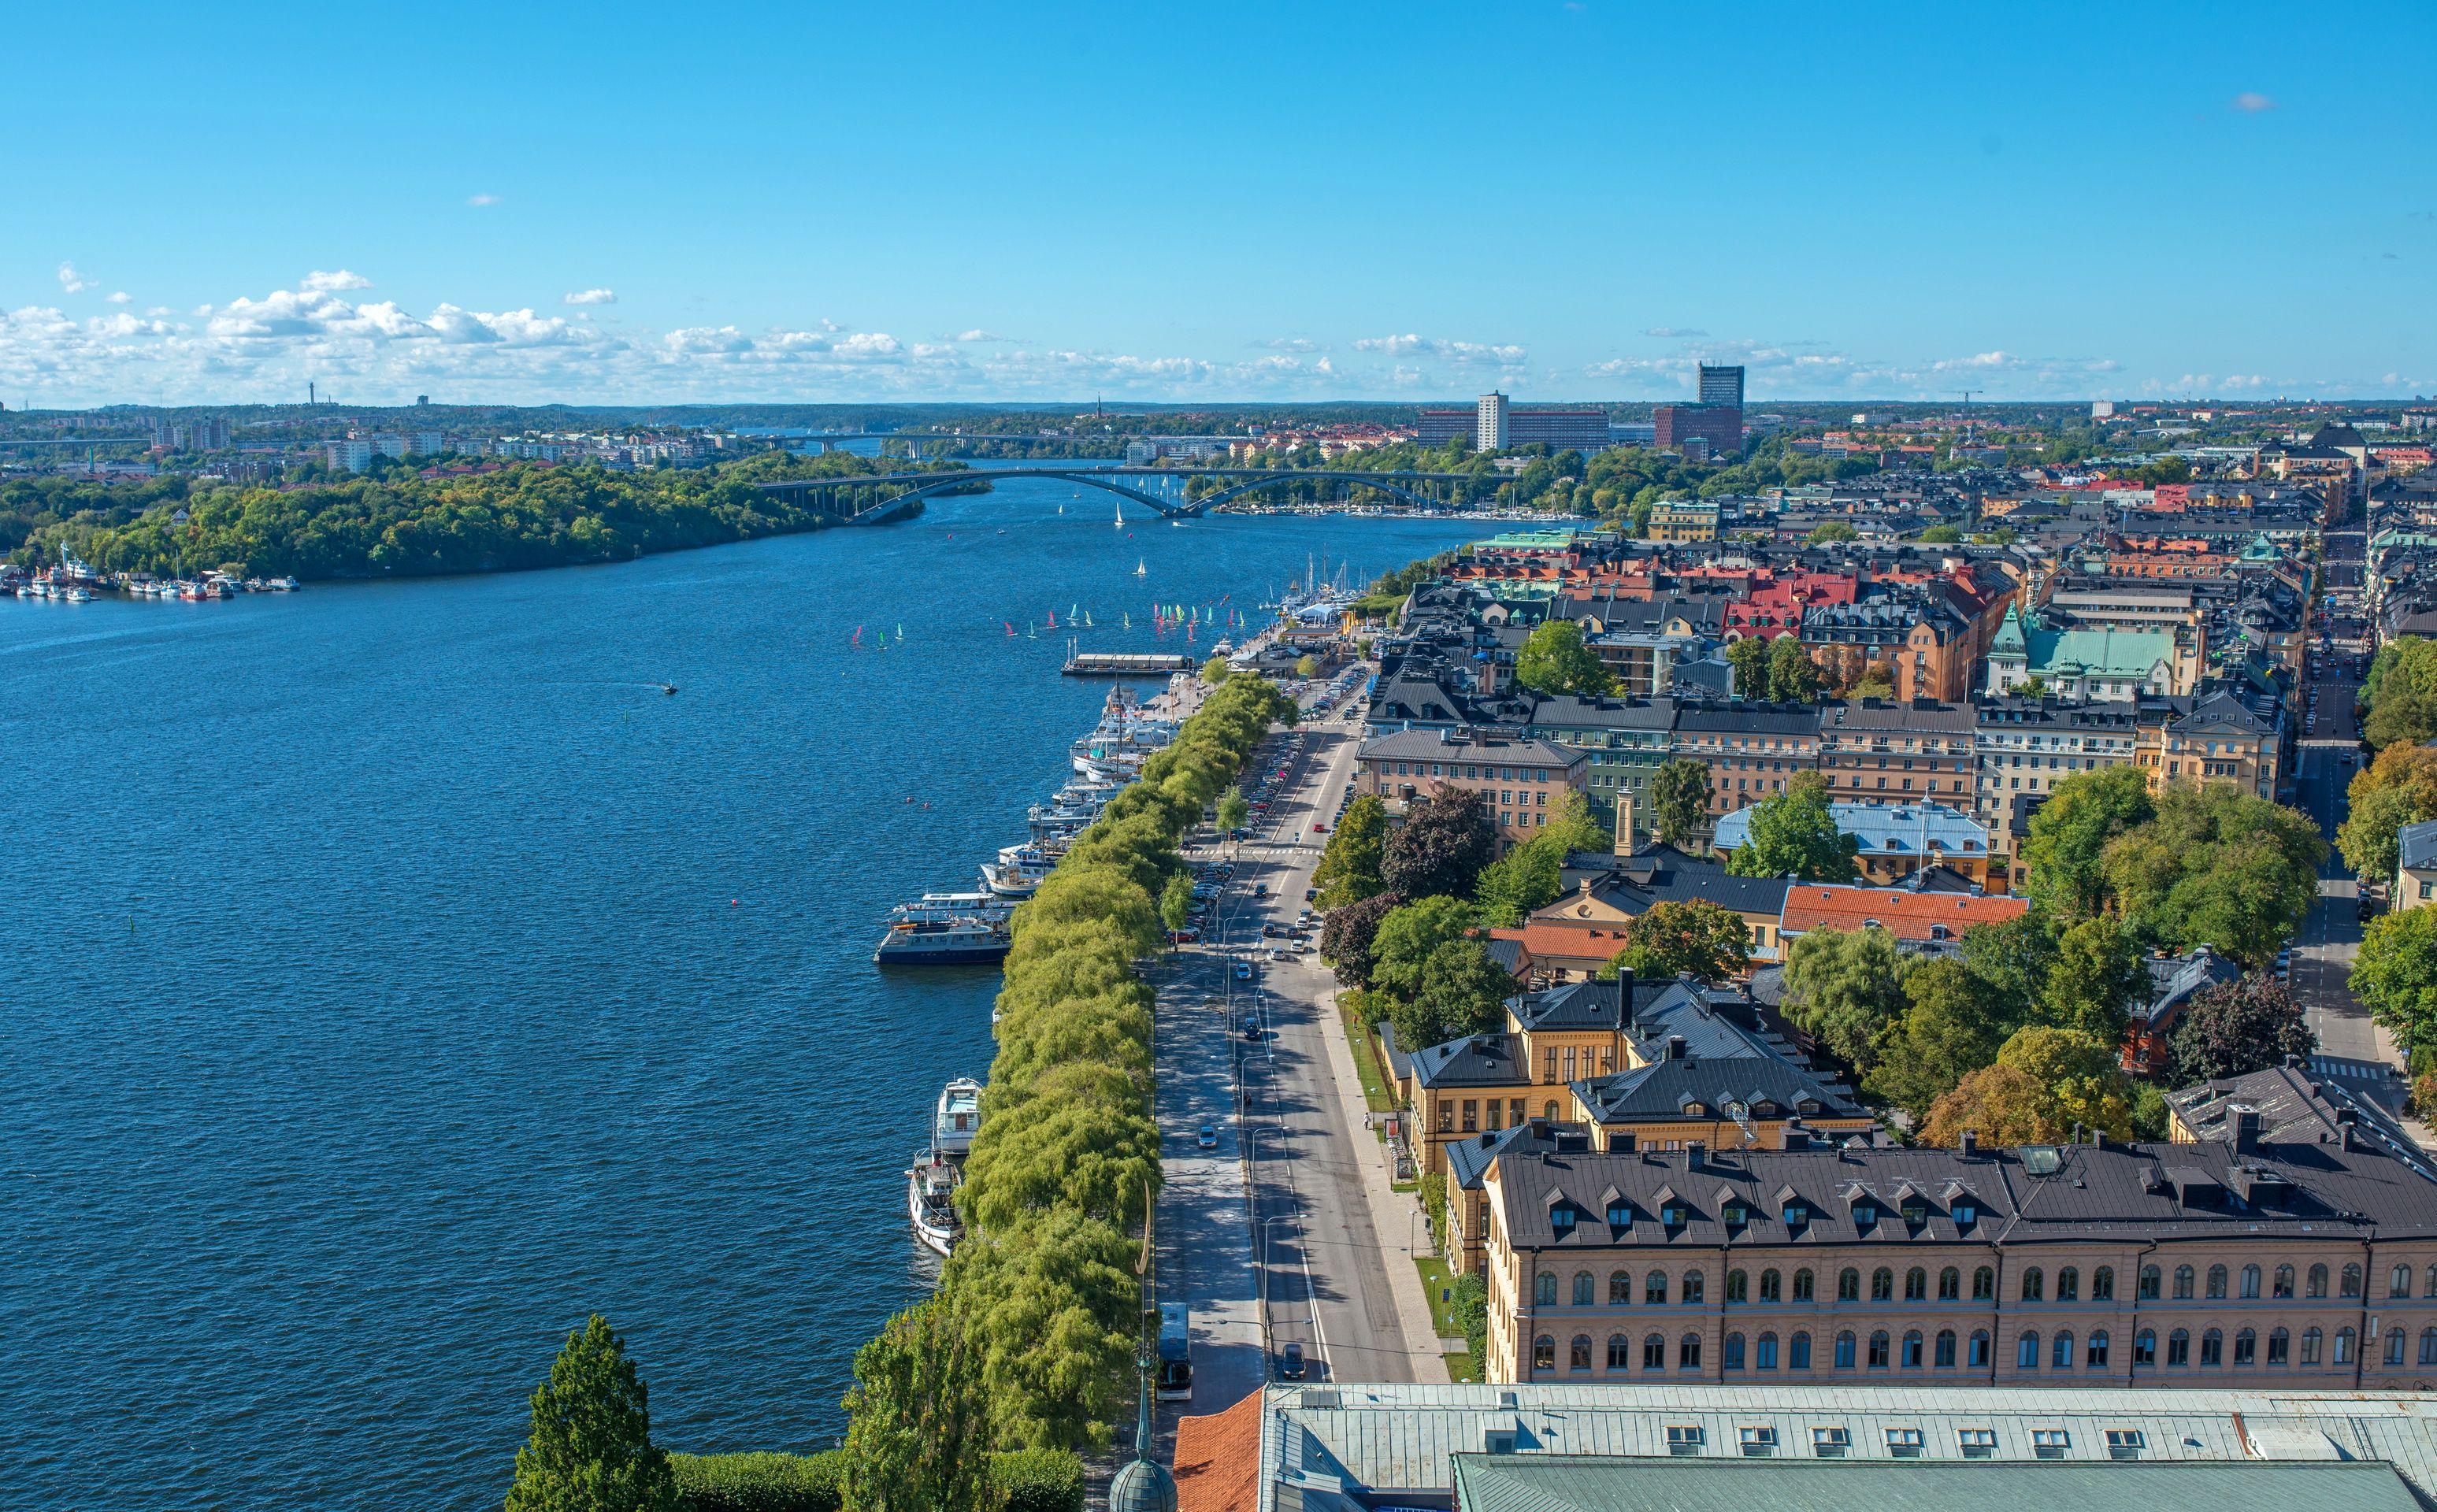 Stockholm Sweden Rivers From above Cities 3094x1920